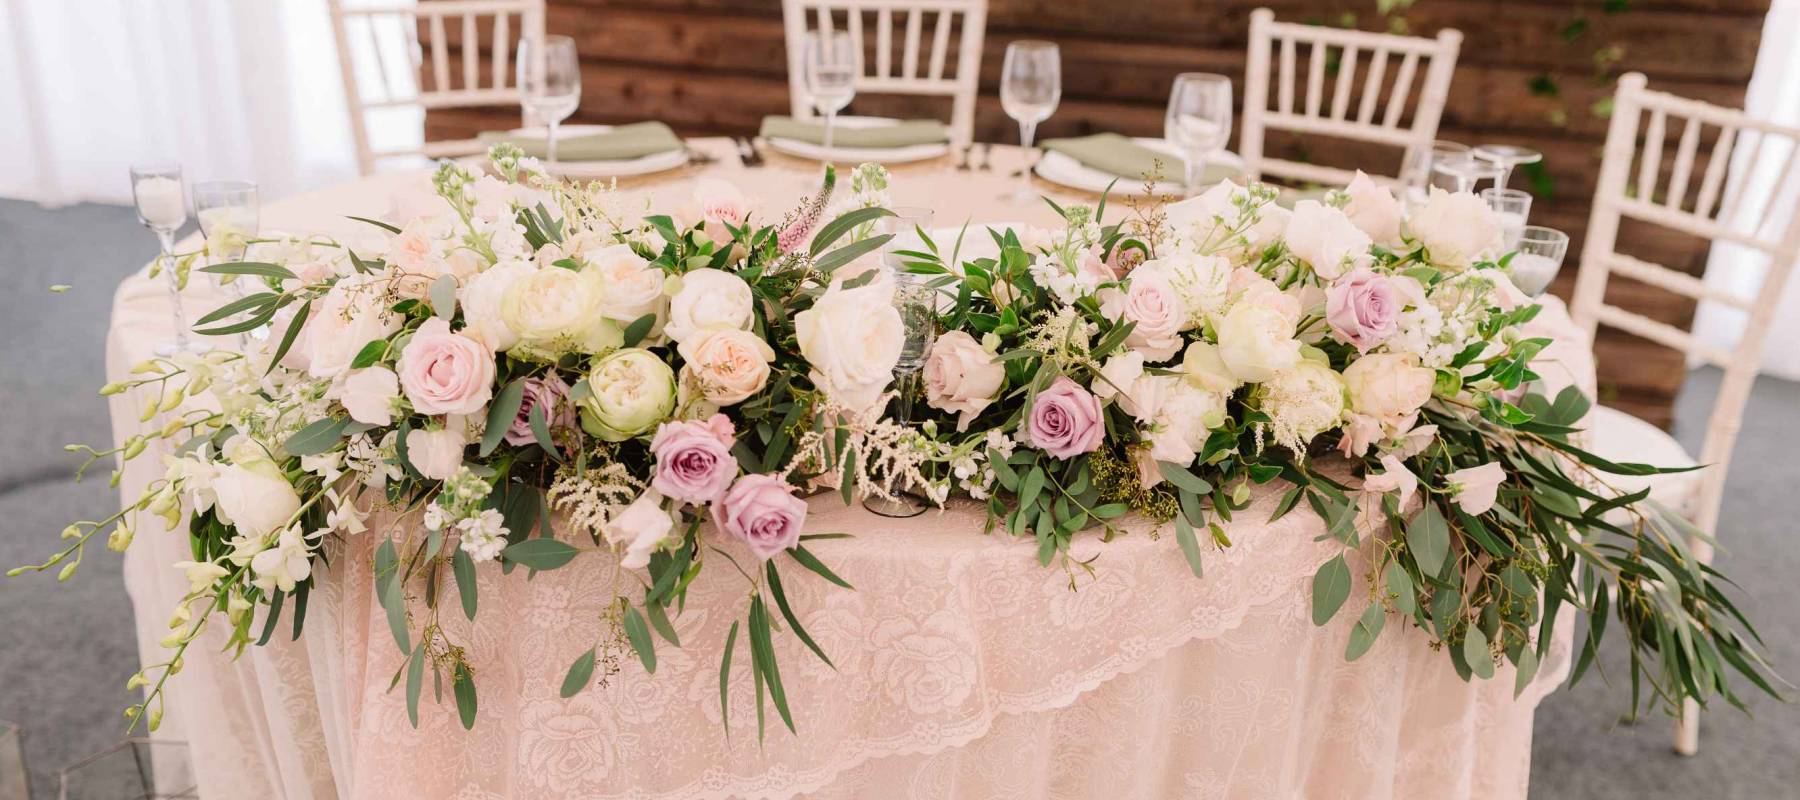 The Average Cost of Wedding Flowers